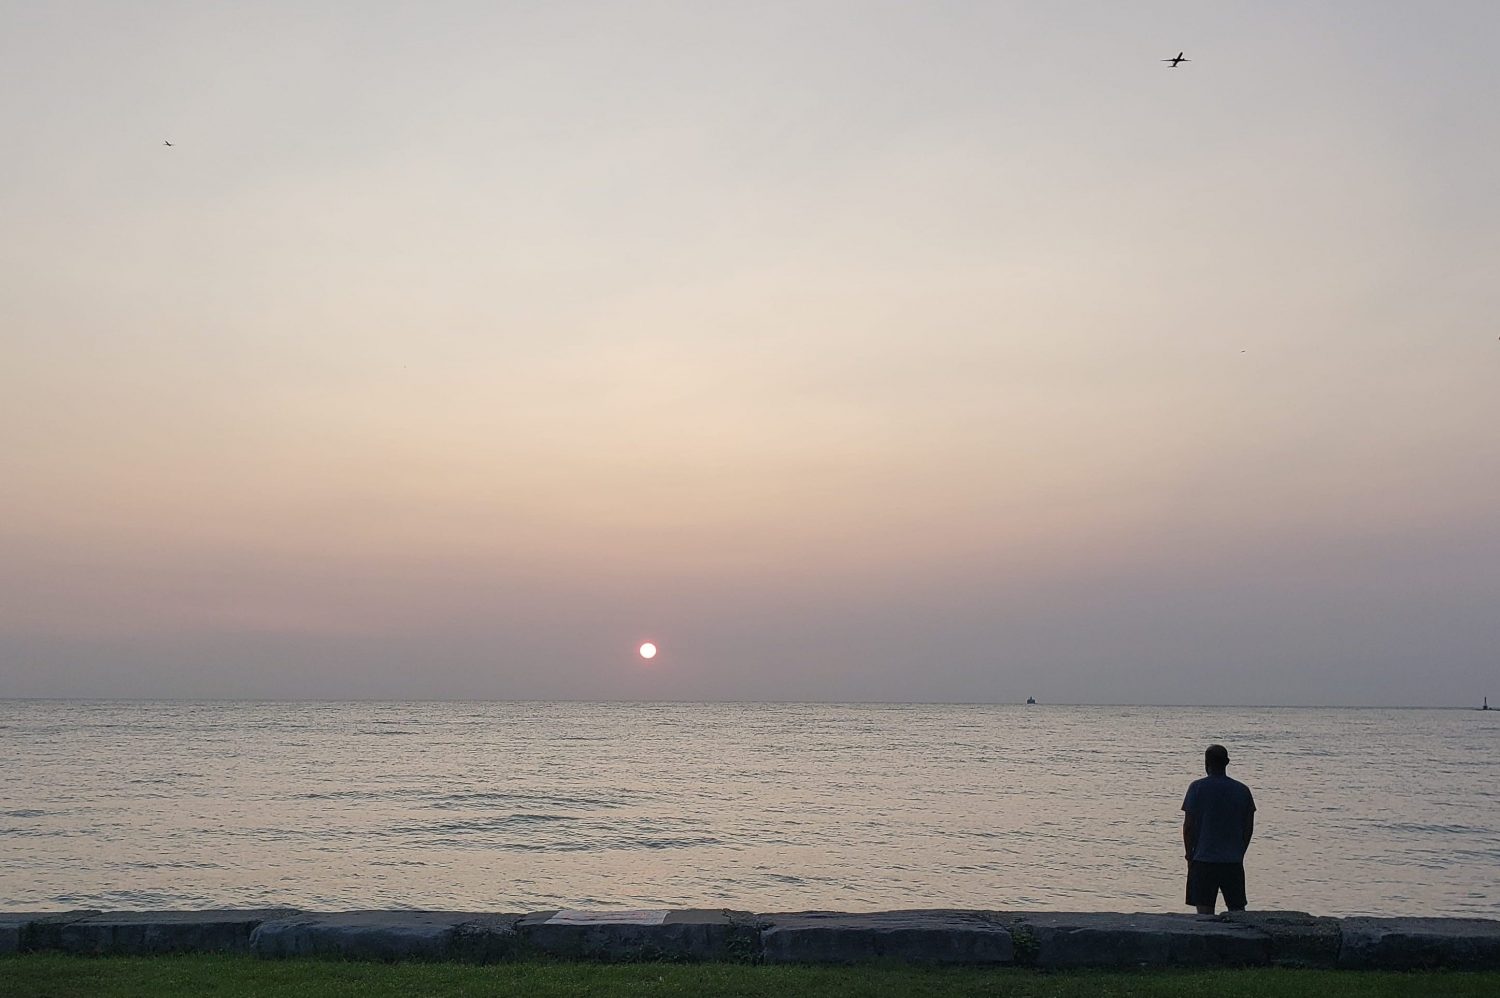 A reddish sun rises in a hazy sky over the lakefront.